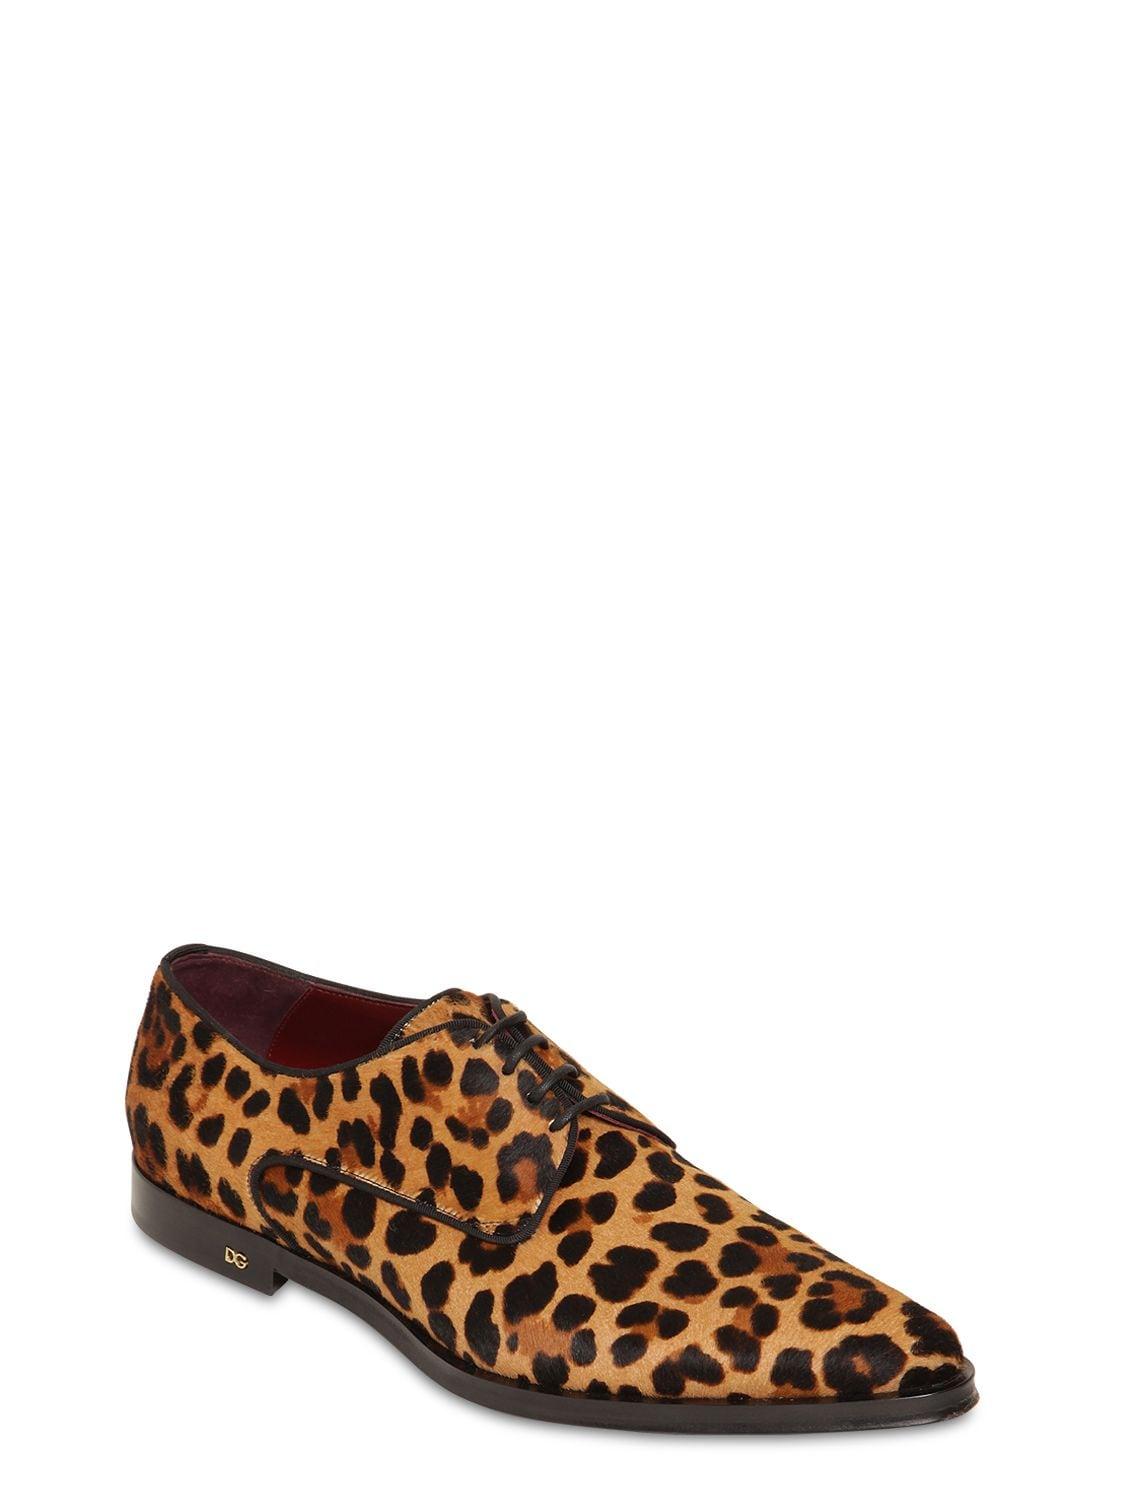 Dolce & Gabbana Leather Leopard-print Pony Hair Derby Shoes in Brown for  Men - Save 54% - Lyst